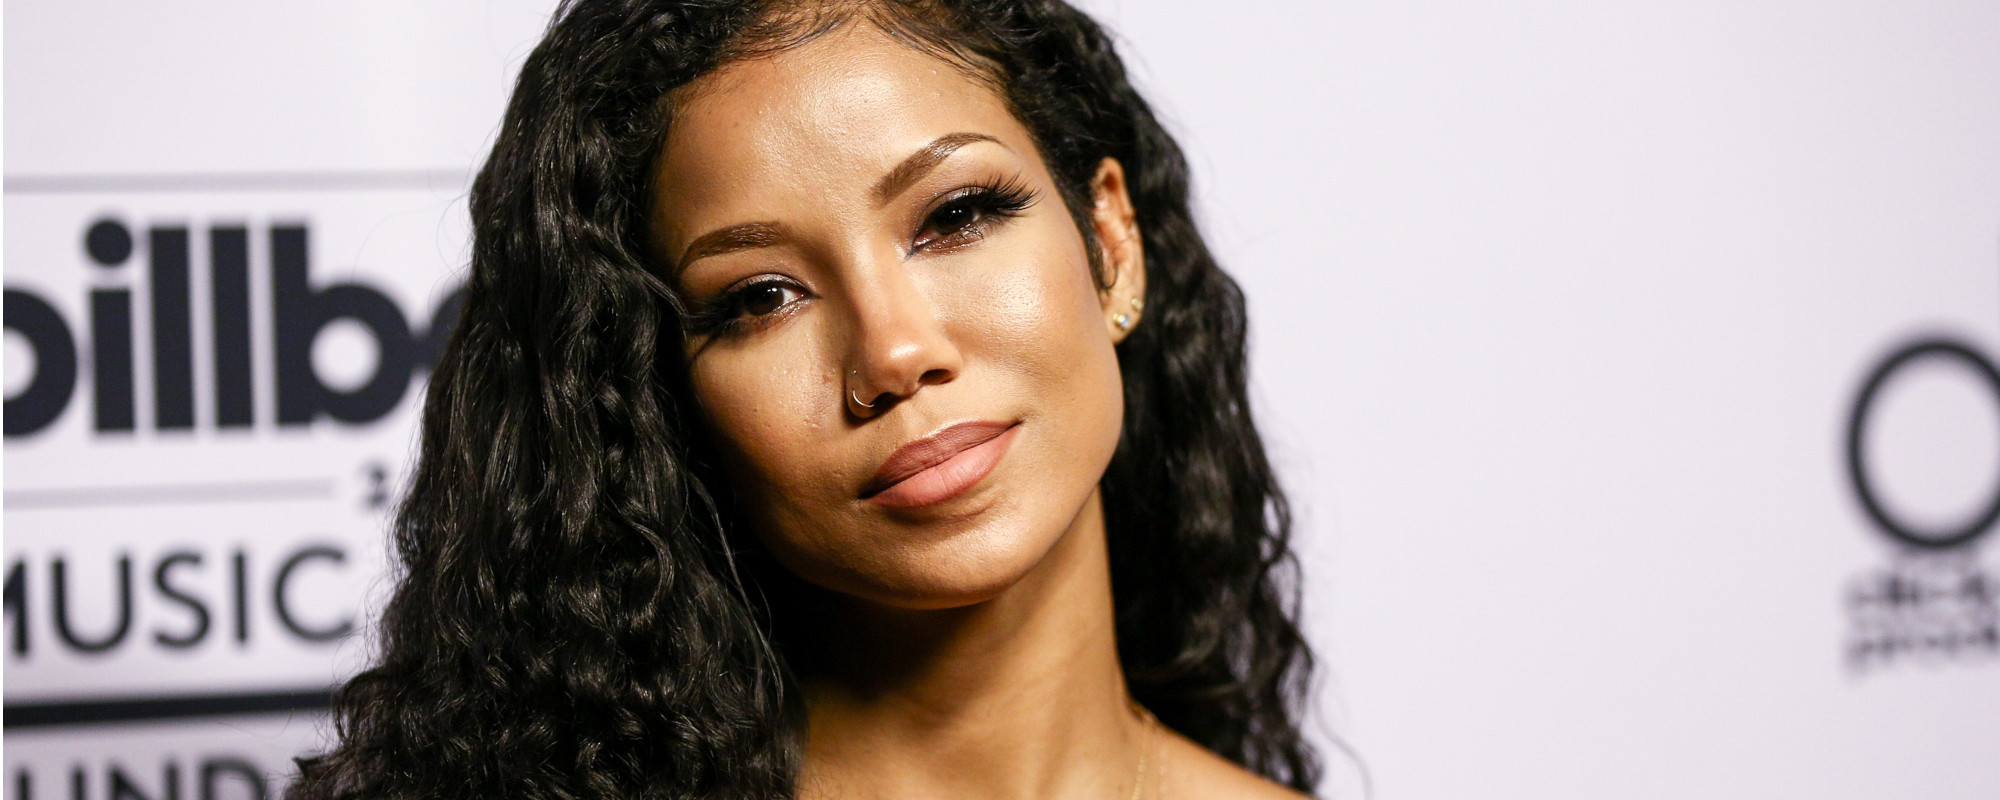 Ex-NFL Star Gets Full Arm Tattoo of Jhené Aiko's Name Despite Never Meeting  Her: “That's My Spiritual Wife” - American Songwriter